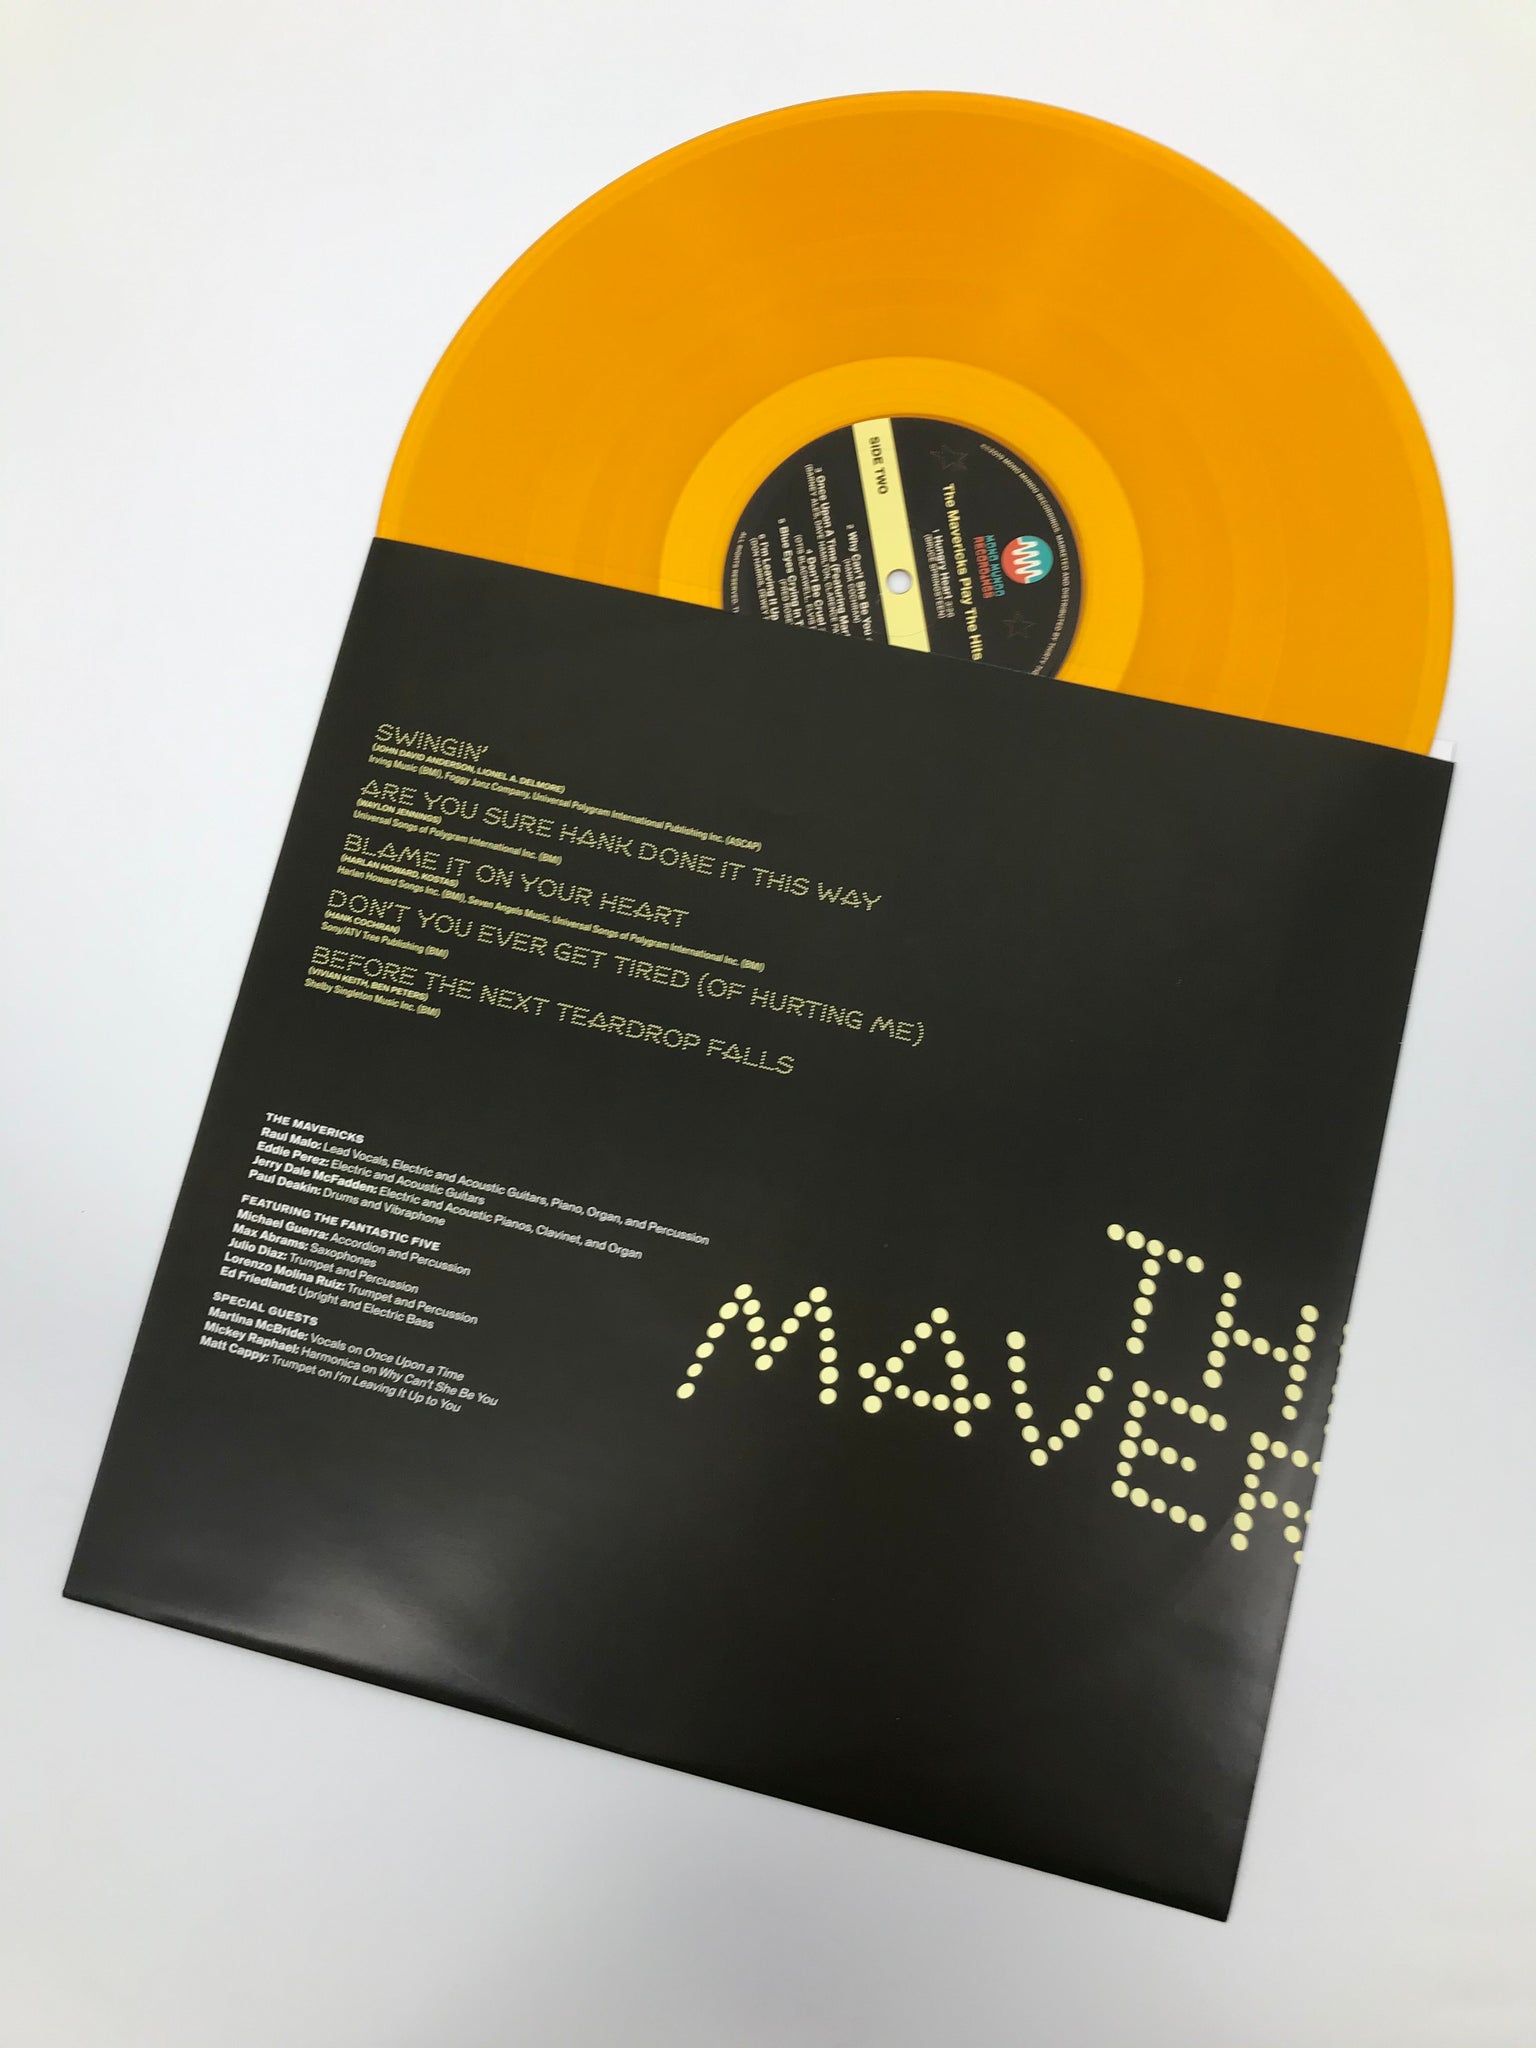 Autographed Play The Hits Limited Edition Gold Vinyl